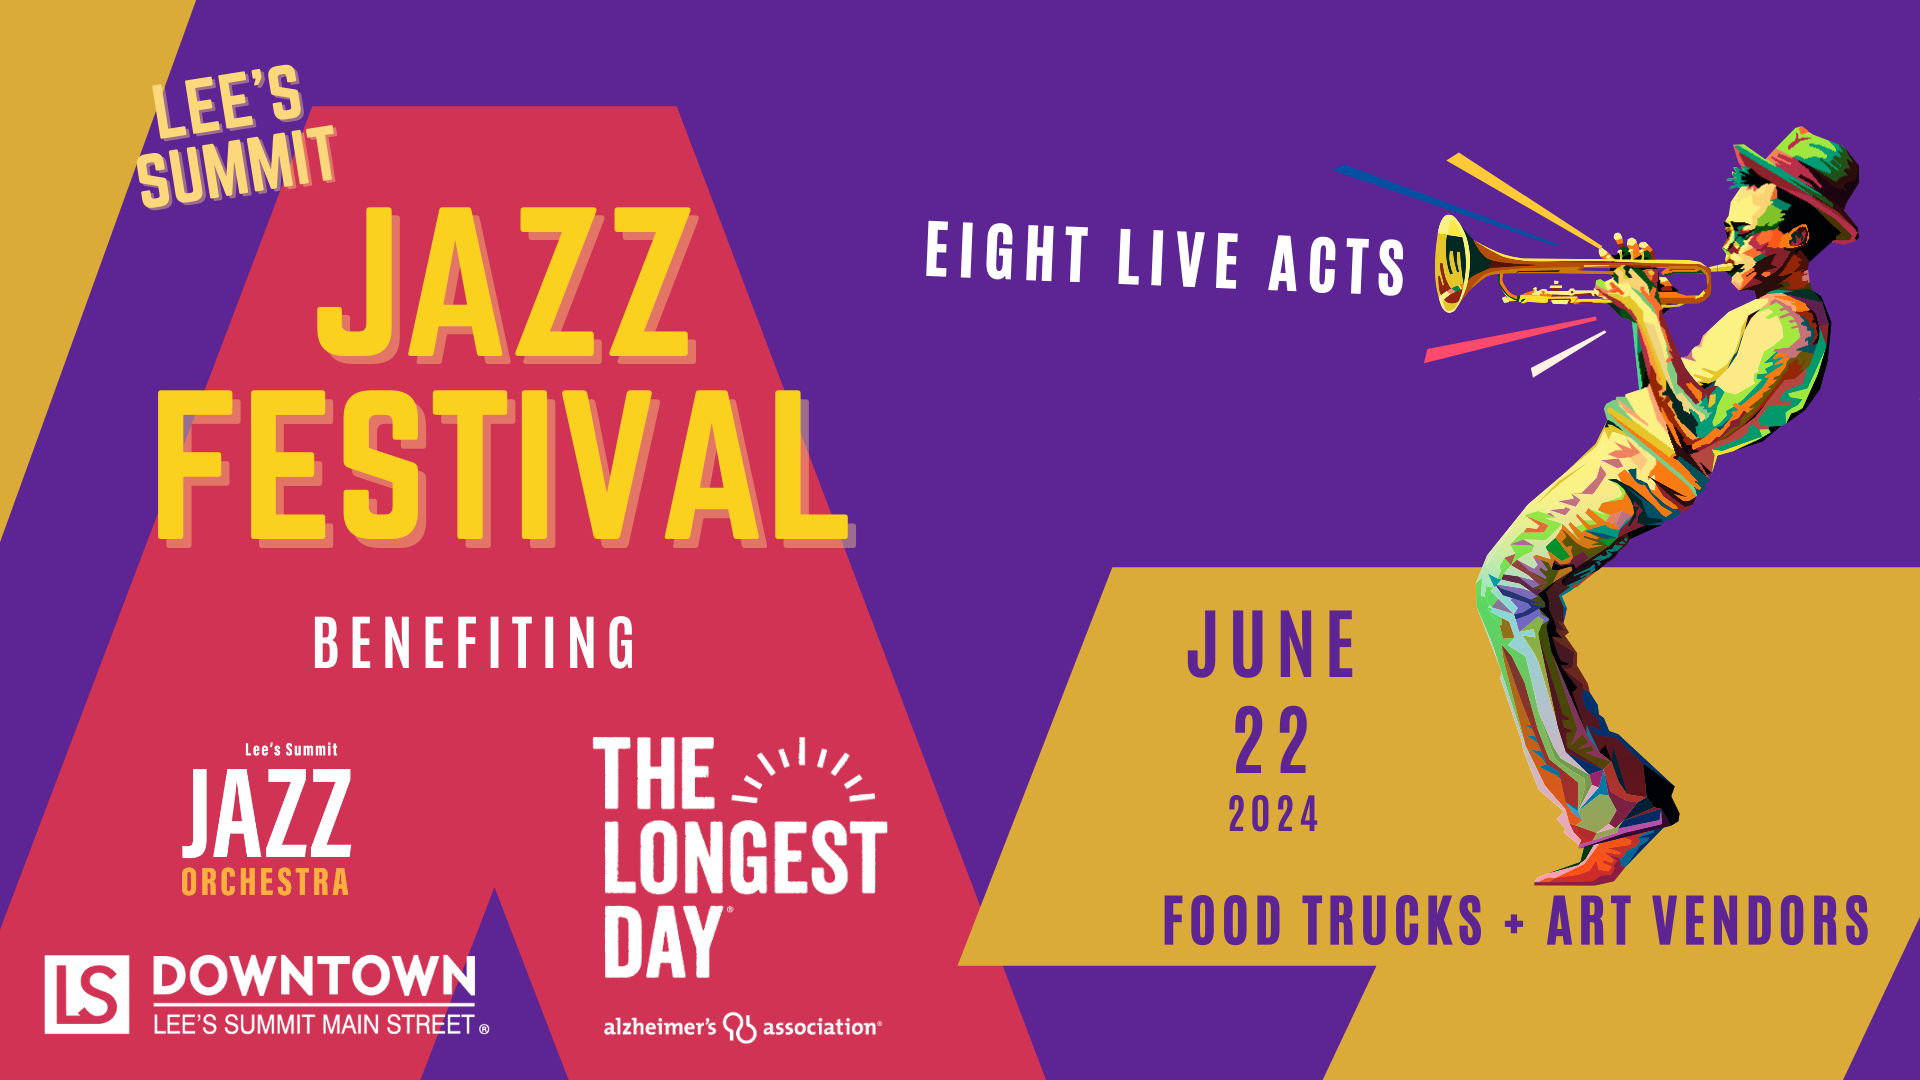 a poster for lee 's summit jazz festival shows a man playing a trumpet .